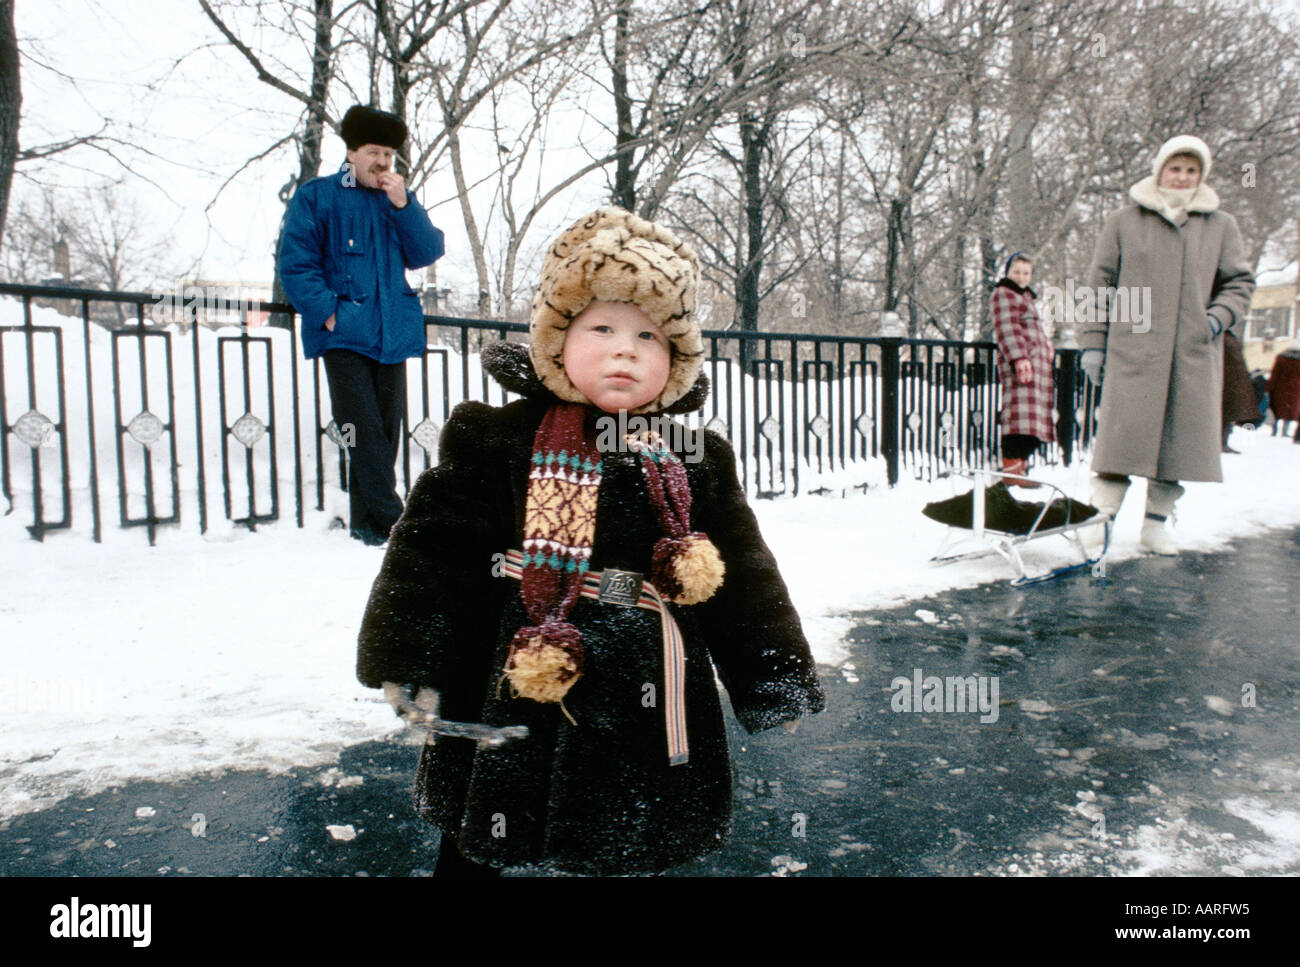 SVERDLOVSK MARCH 1991 YOUNG CHILD ON STREET WOMAN BEHIND WITH SLEDGE  Stock Photo